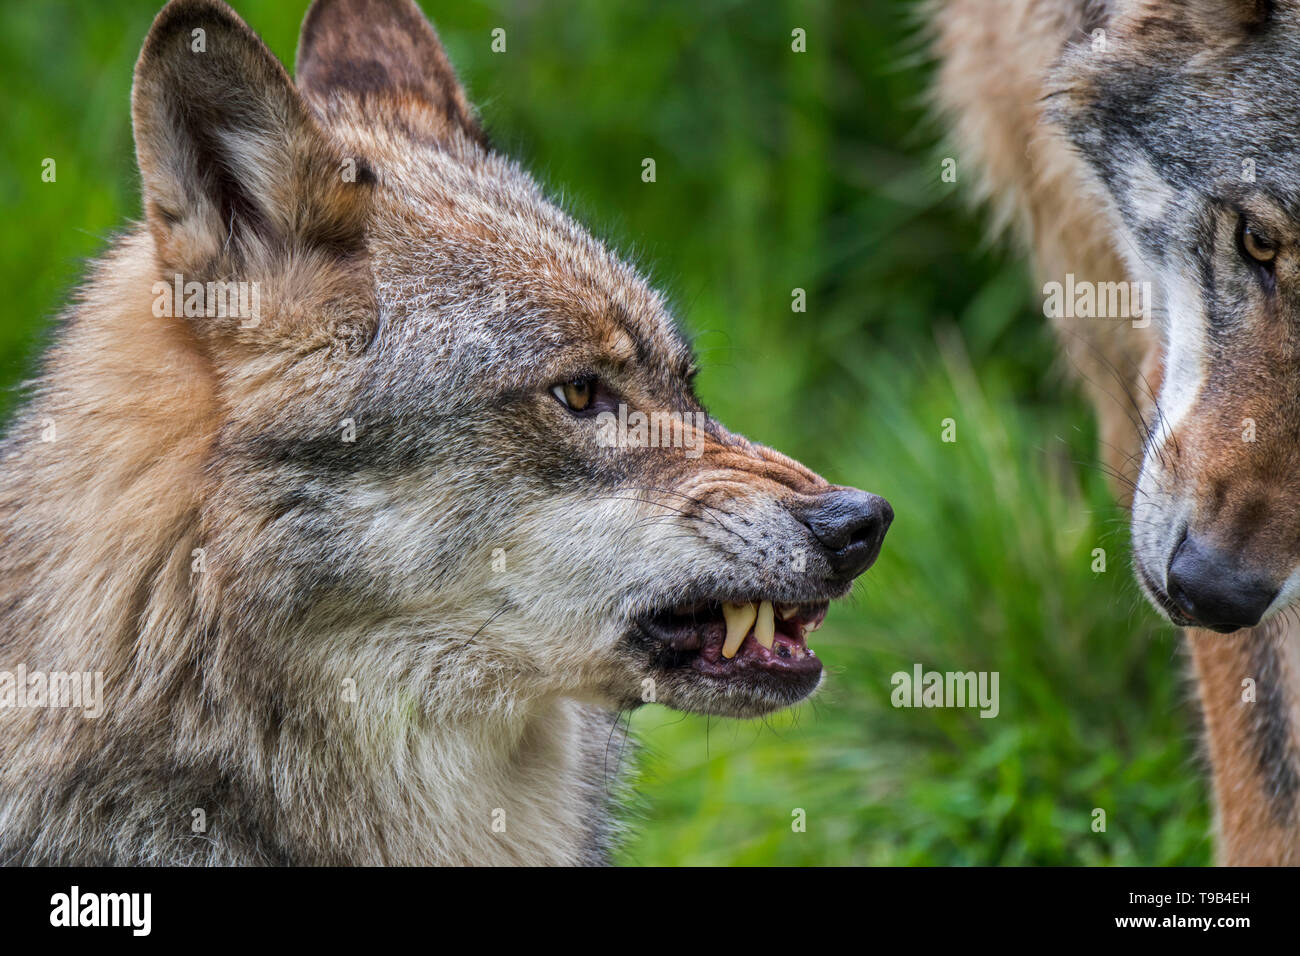 Angry, confident and dominant wolf (Canis lupus) showing ears in upward position, wrinkled nose and baring its fangs while snarling / growling Stock Photo